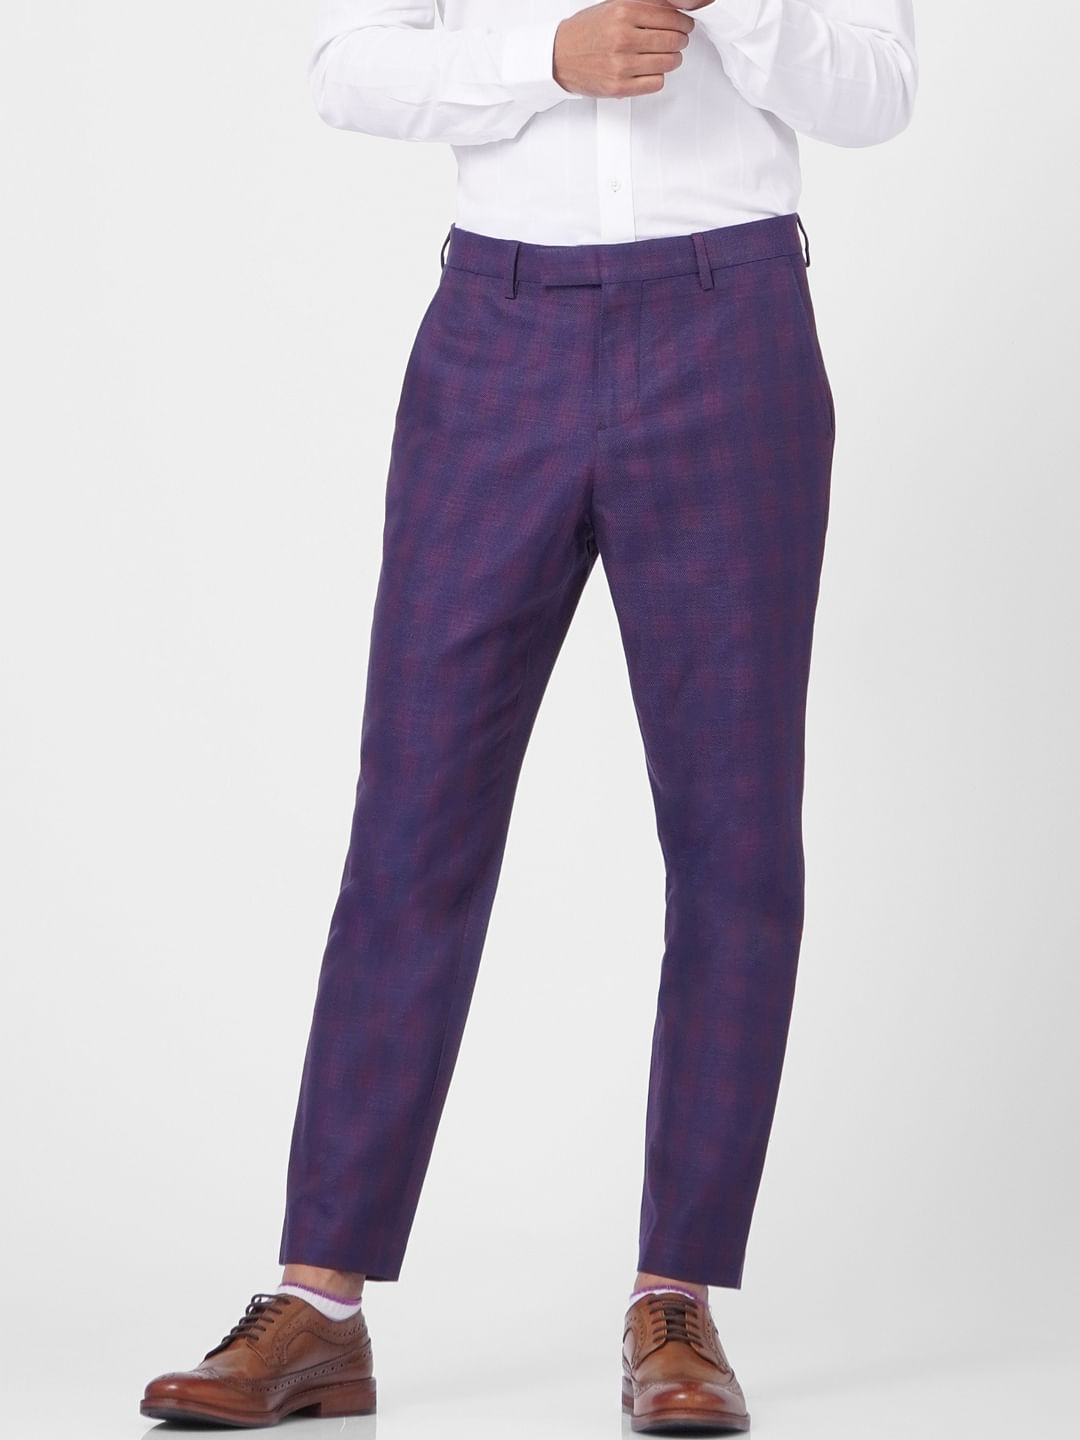 CHALODIA Regular Fit Women Purple Trousers  Buy CHALODIA Regular Fit Women Purple  Trousers Online at Best Prices in India  Flipkartcom